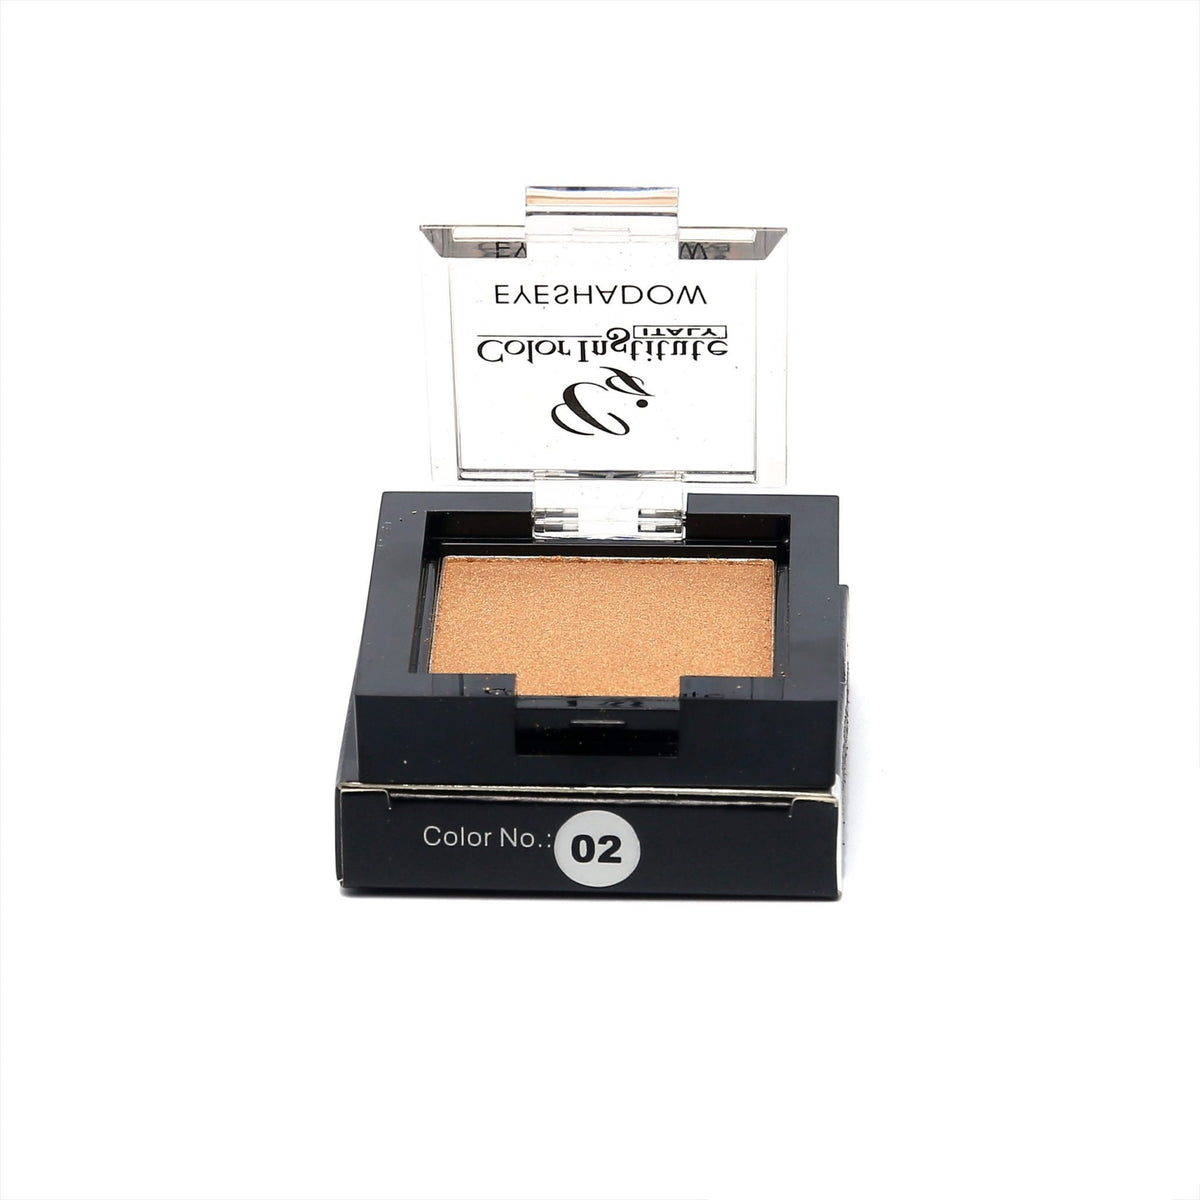 Color Institute Italy Eyeshadow Color freeshipping - lasertag.pk